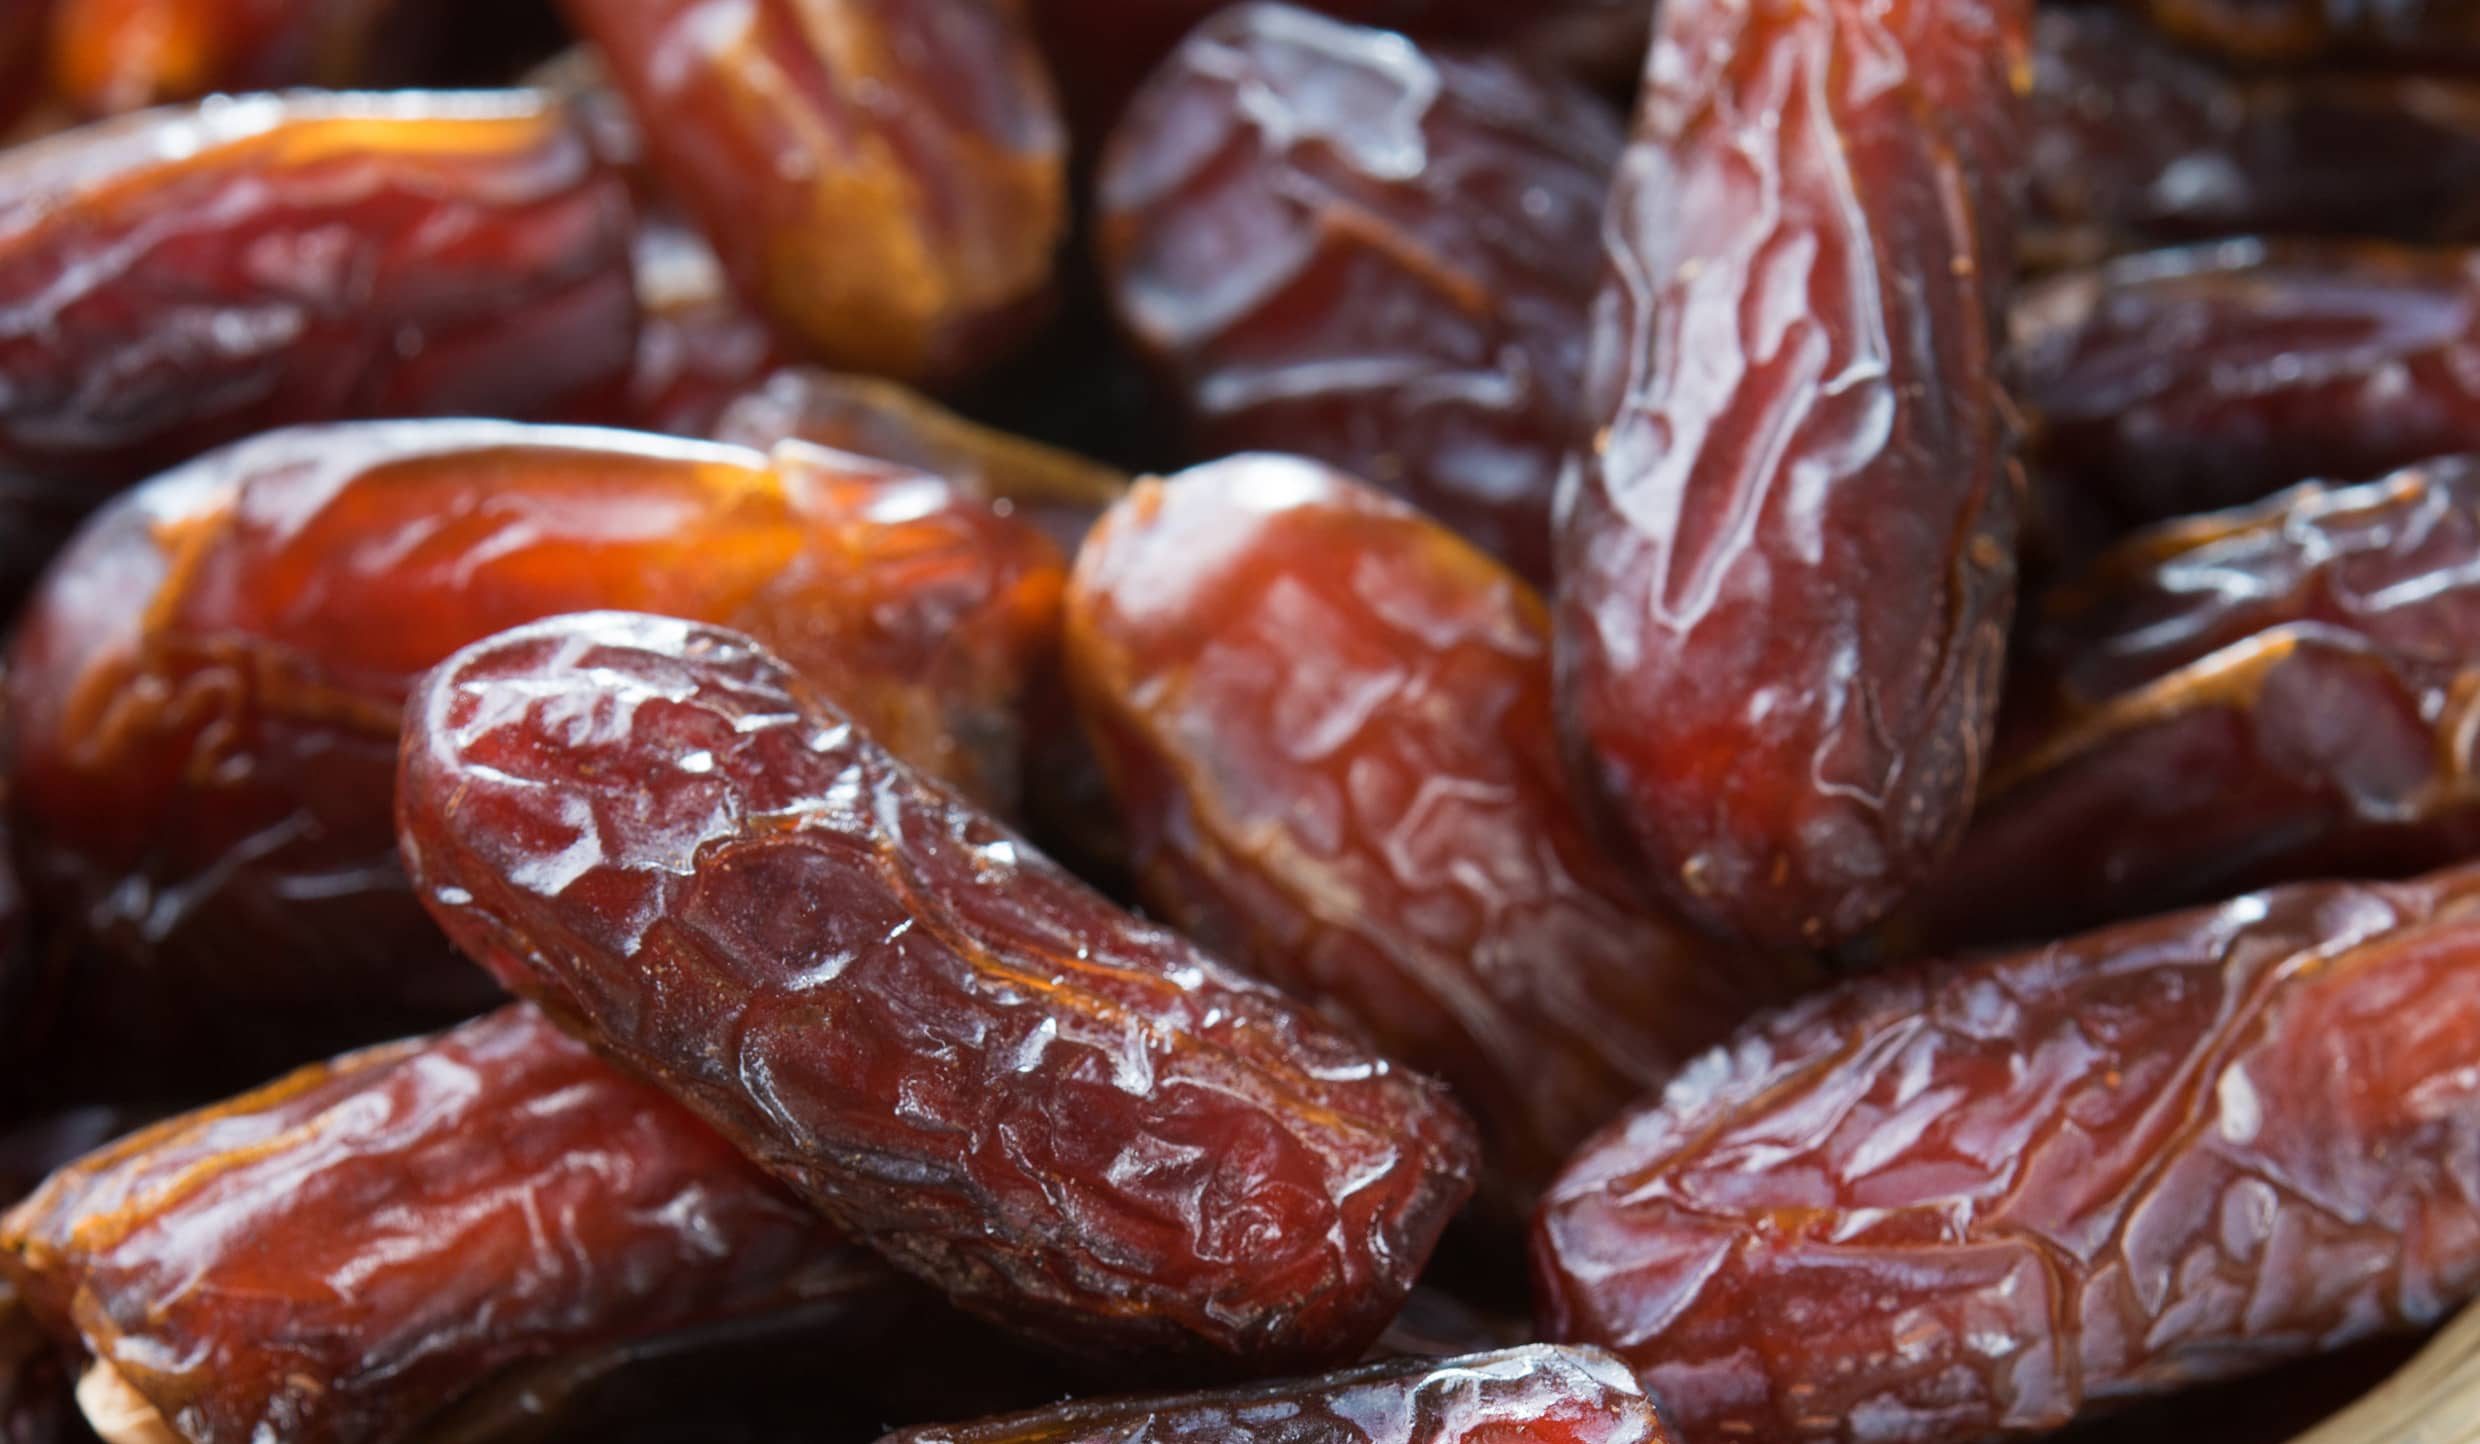 Buy Best dried dates + Great Price With Guaranteed Quality